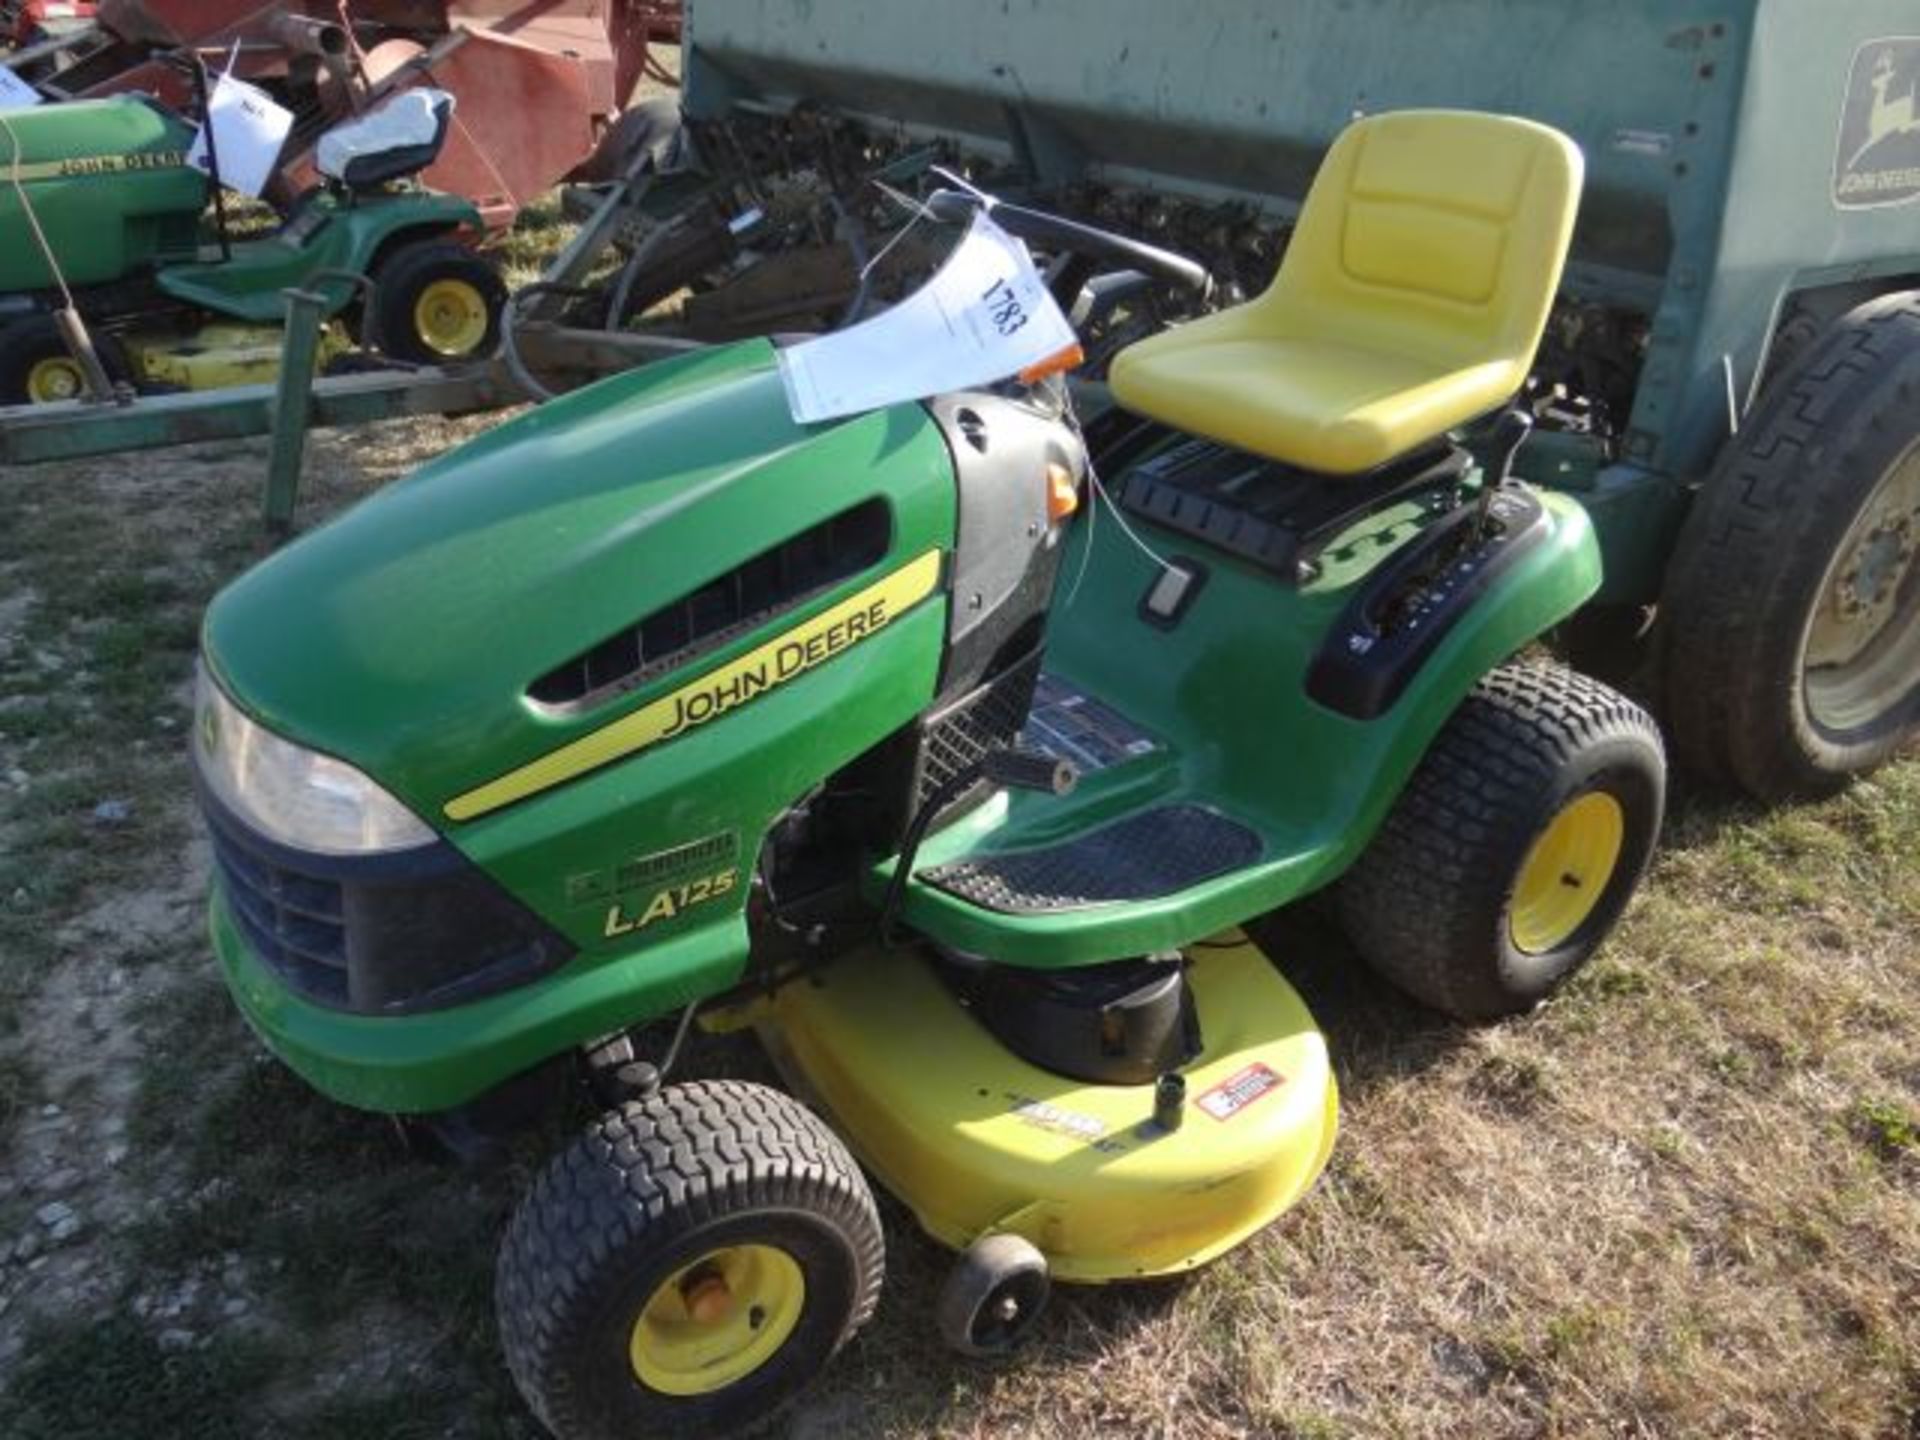 JD LA125 Riding Mower 30" Deck, 11hp, Manual in the Shed - Image 3 of 3